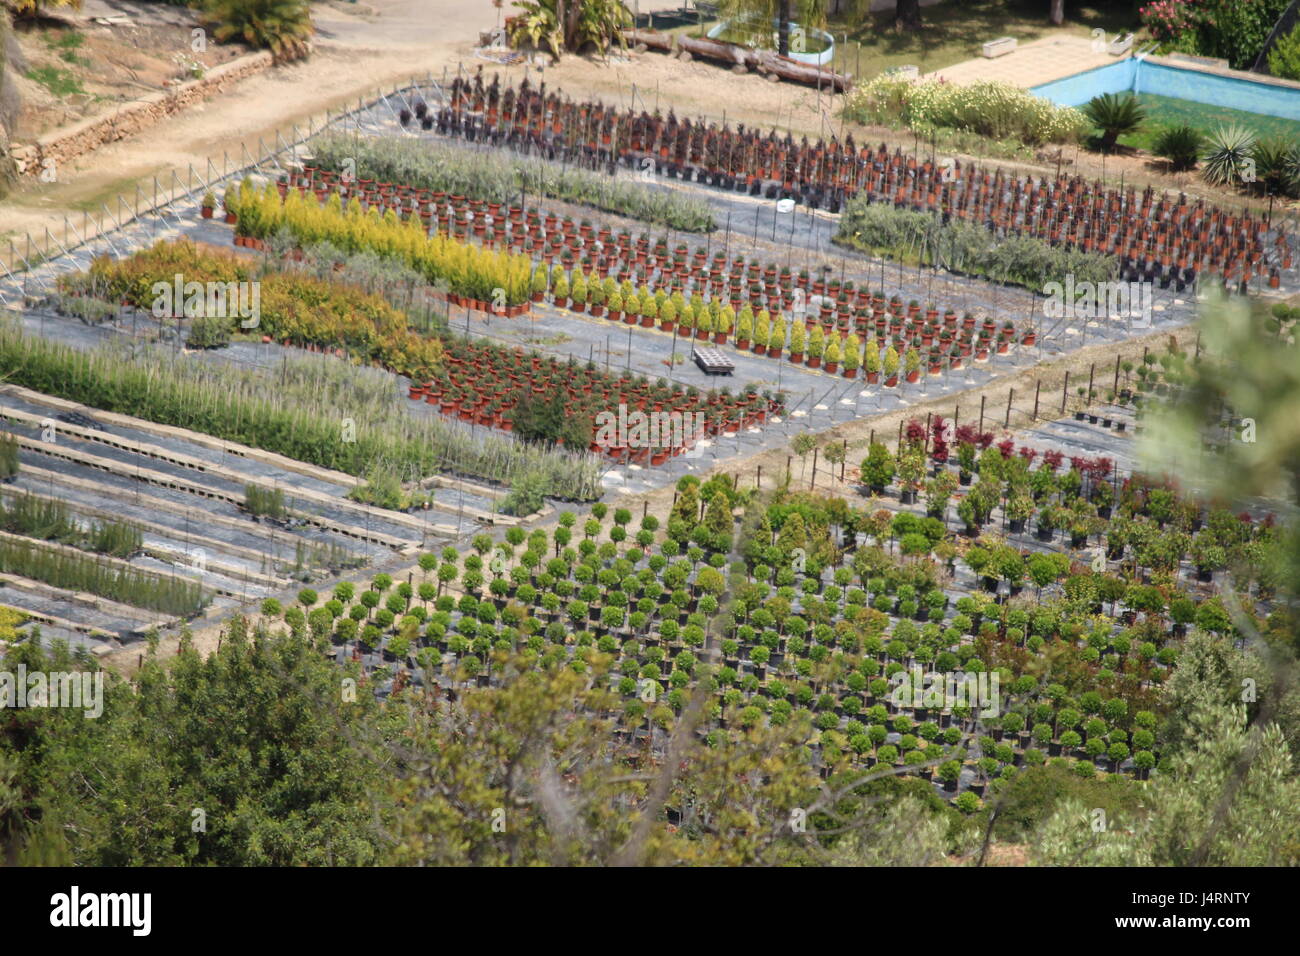 Aerial view of market garden in Catalonia, Spain showing rows and rows of plants, shrubs and small trees. Stock Photo